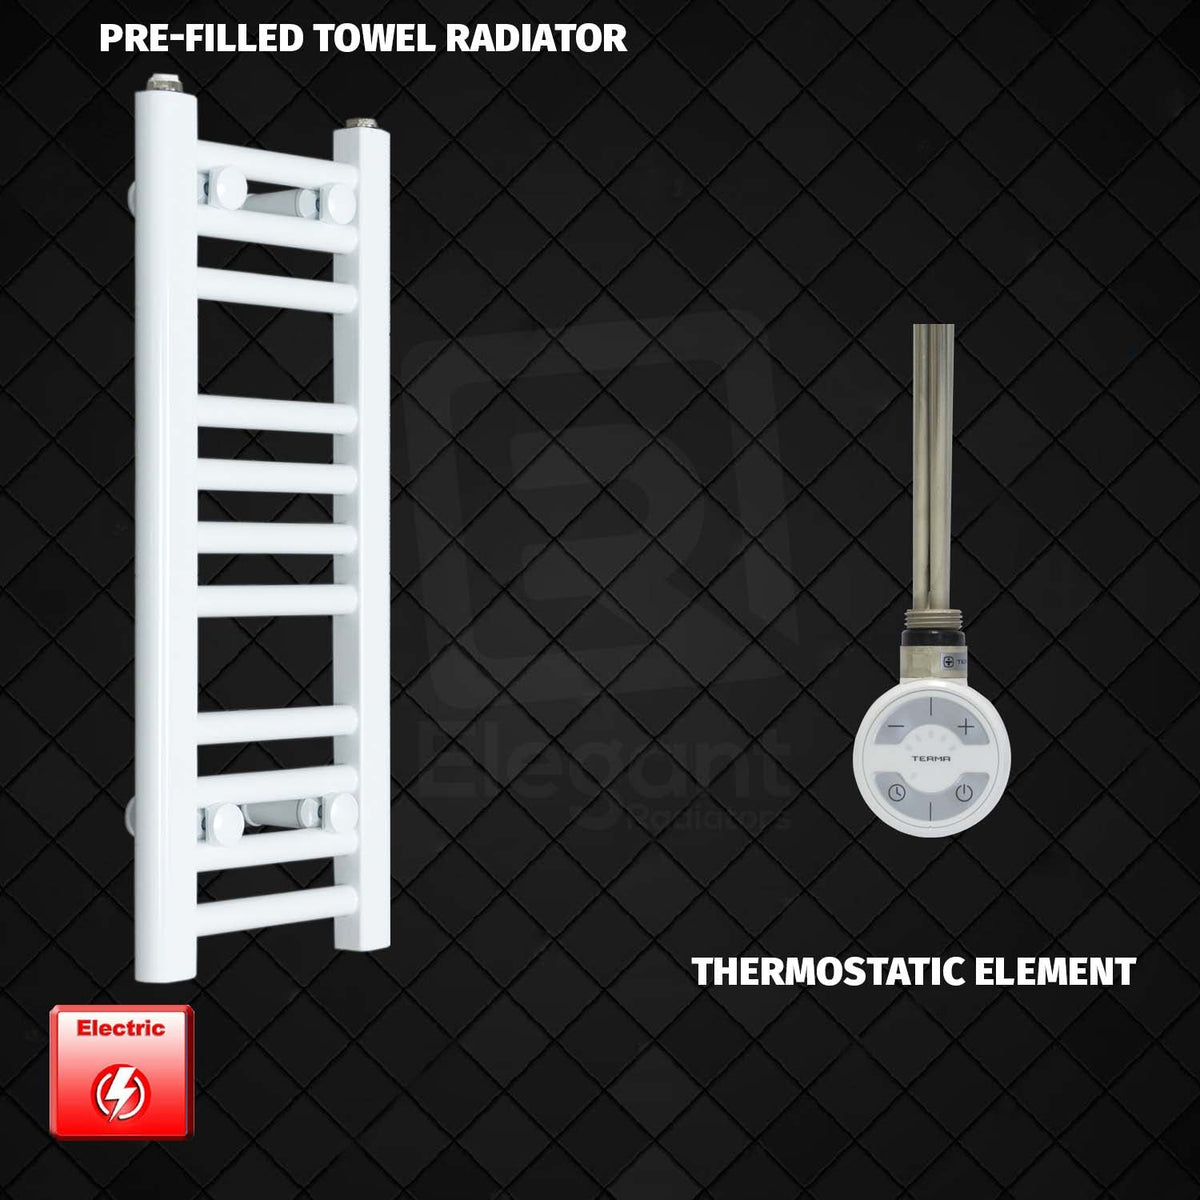 600 x 200 Pre-Filled Electric Heated Towel Radiator White HTR MOA Thermostatic Element No Timer